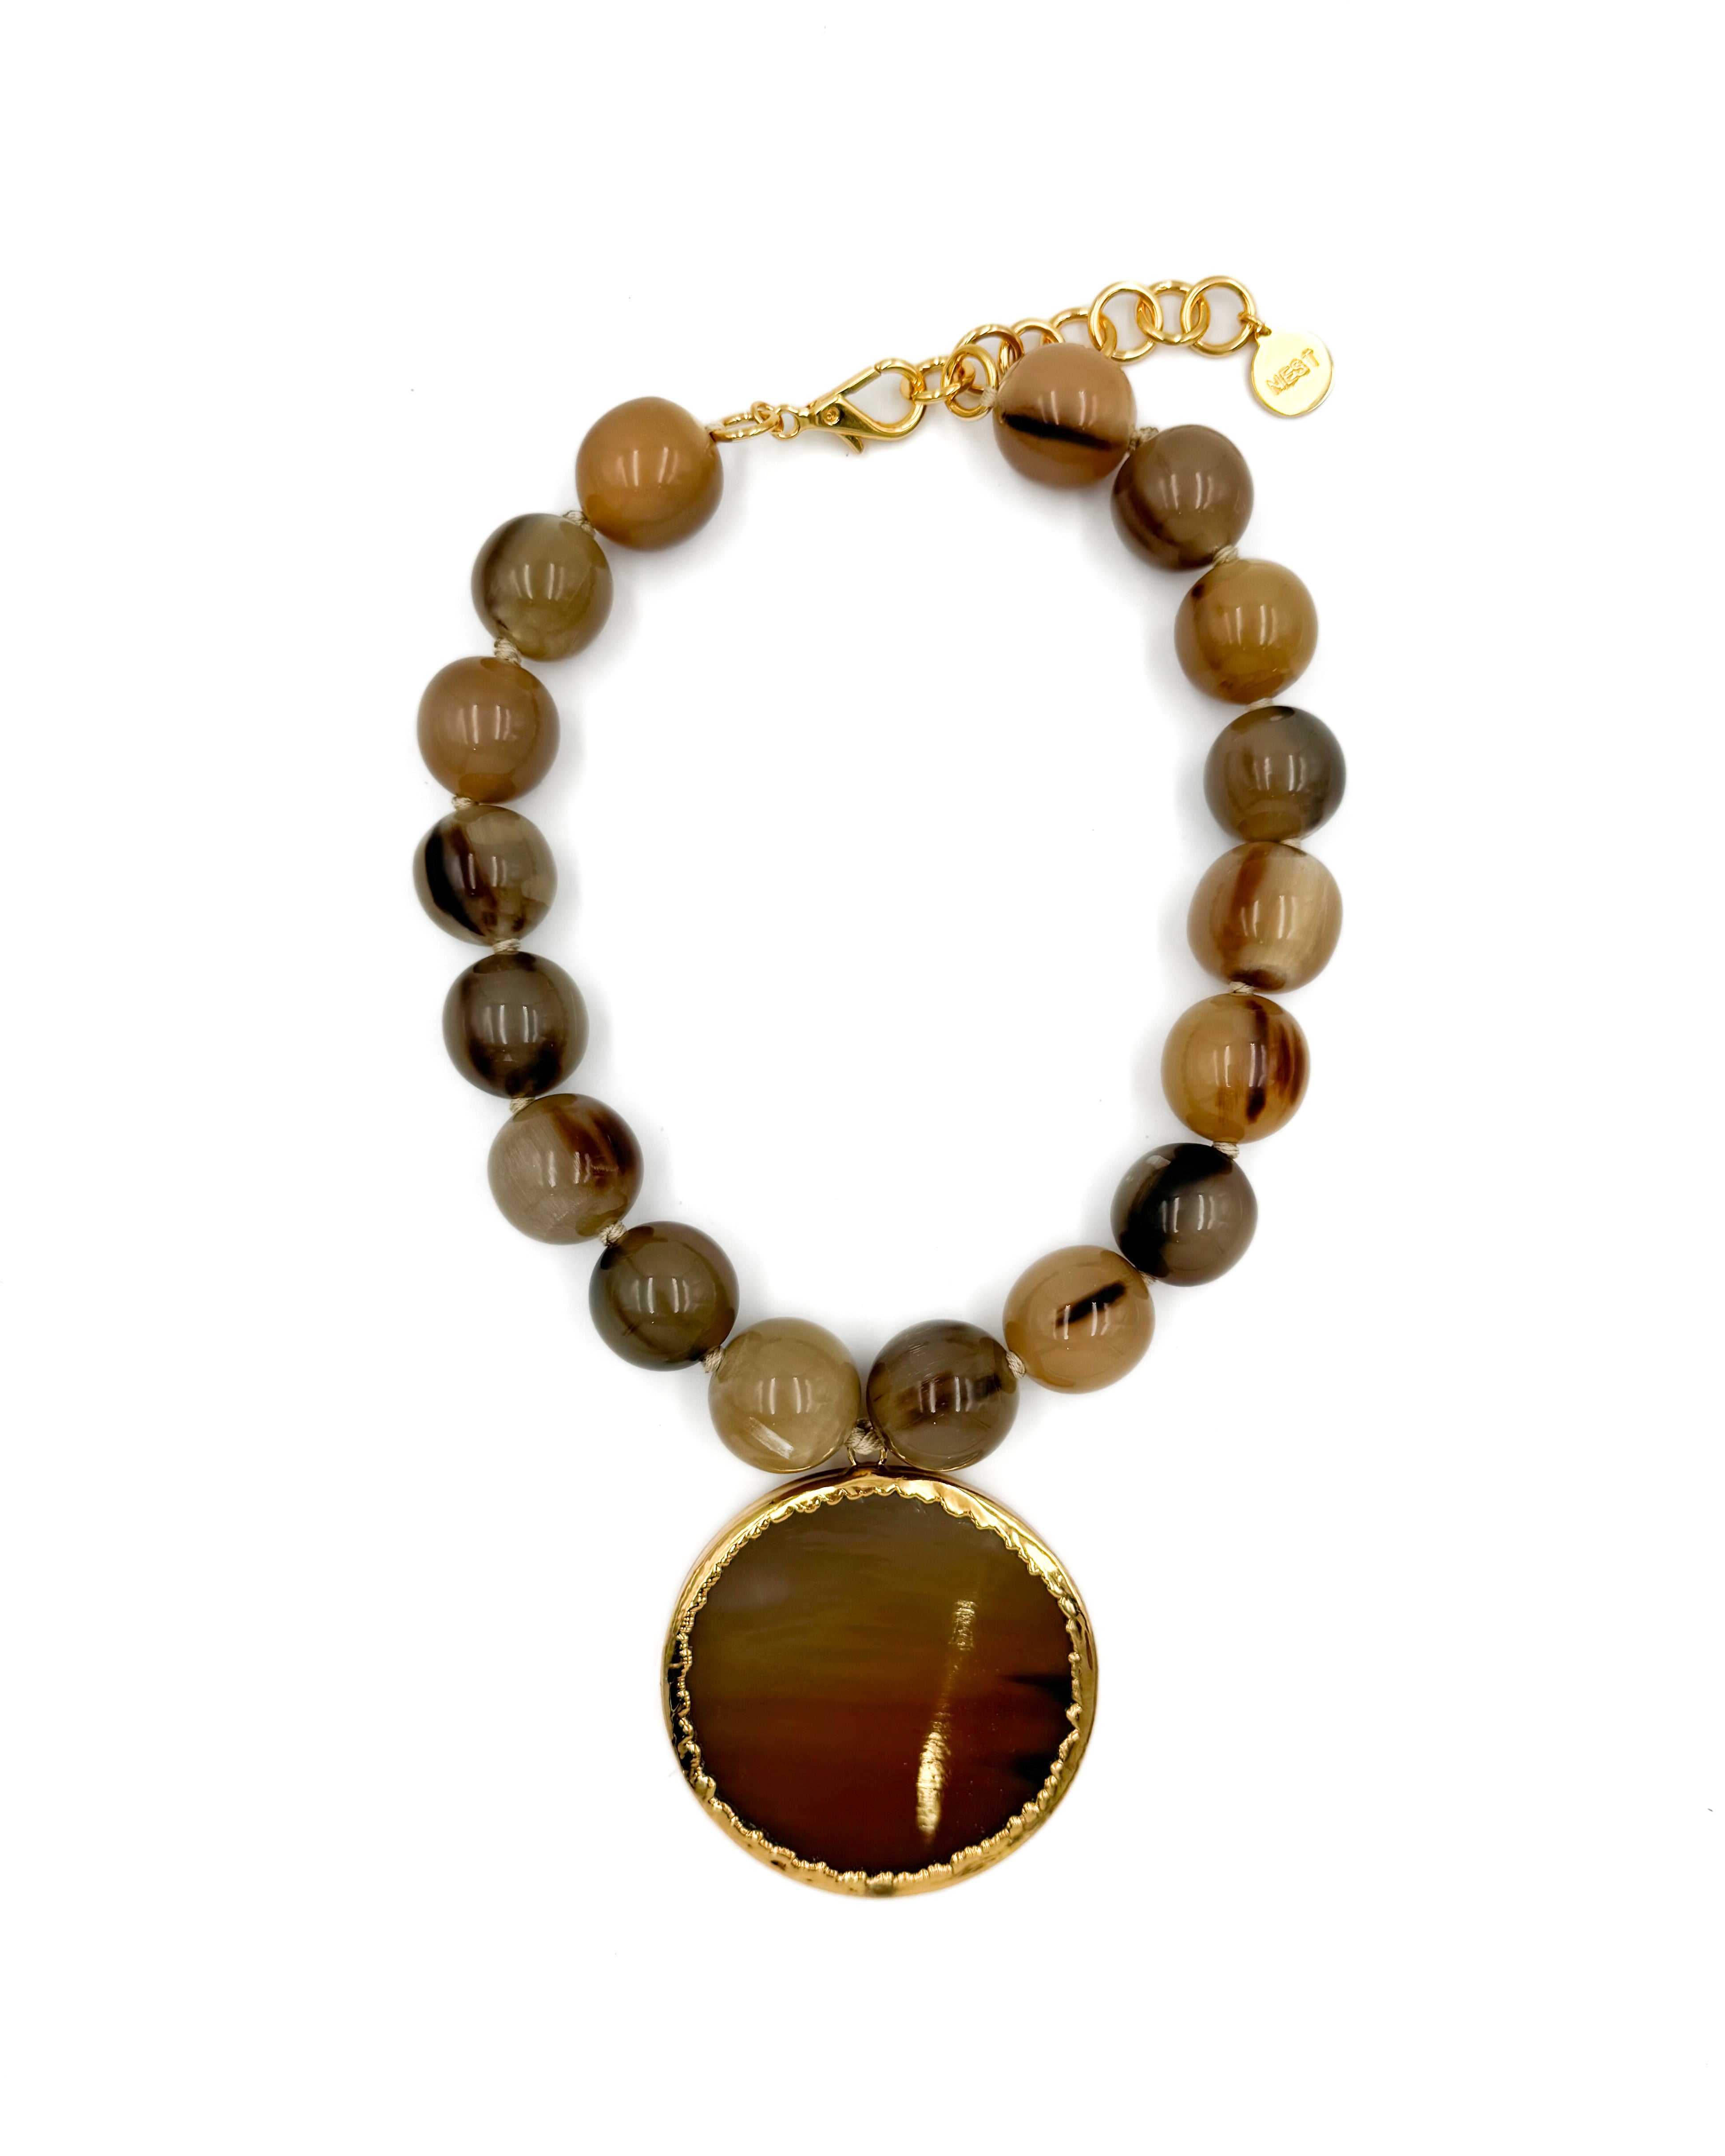 Horn Beaded Necklace with Gold Trimmed Pendant